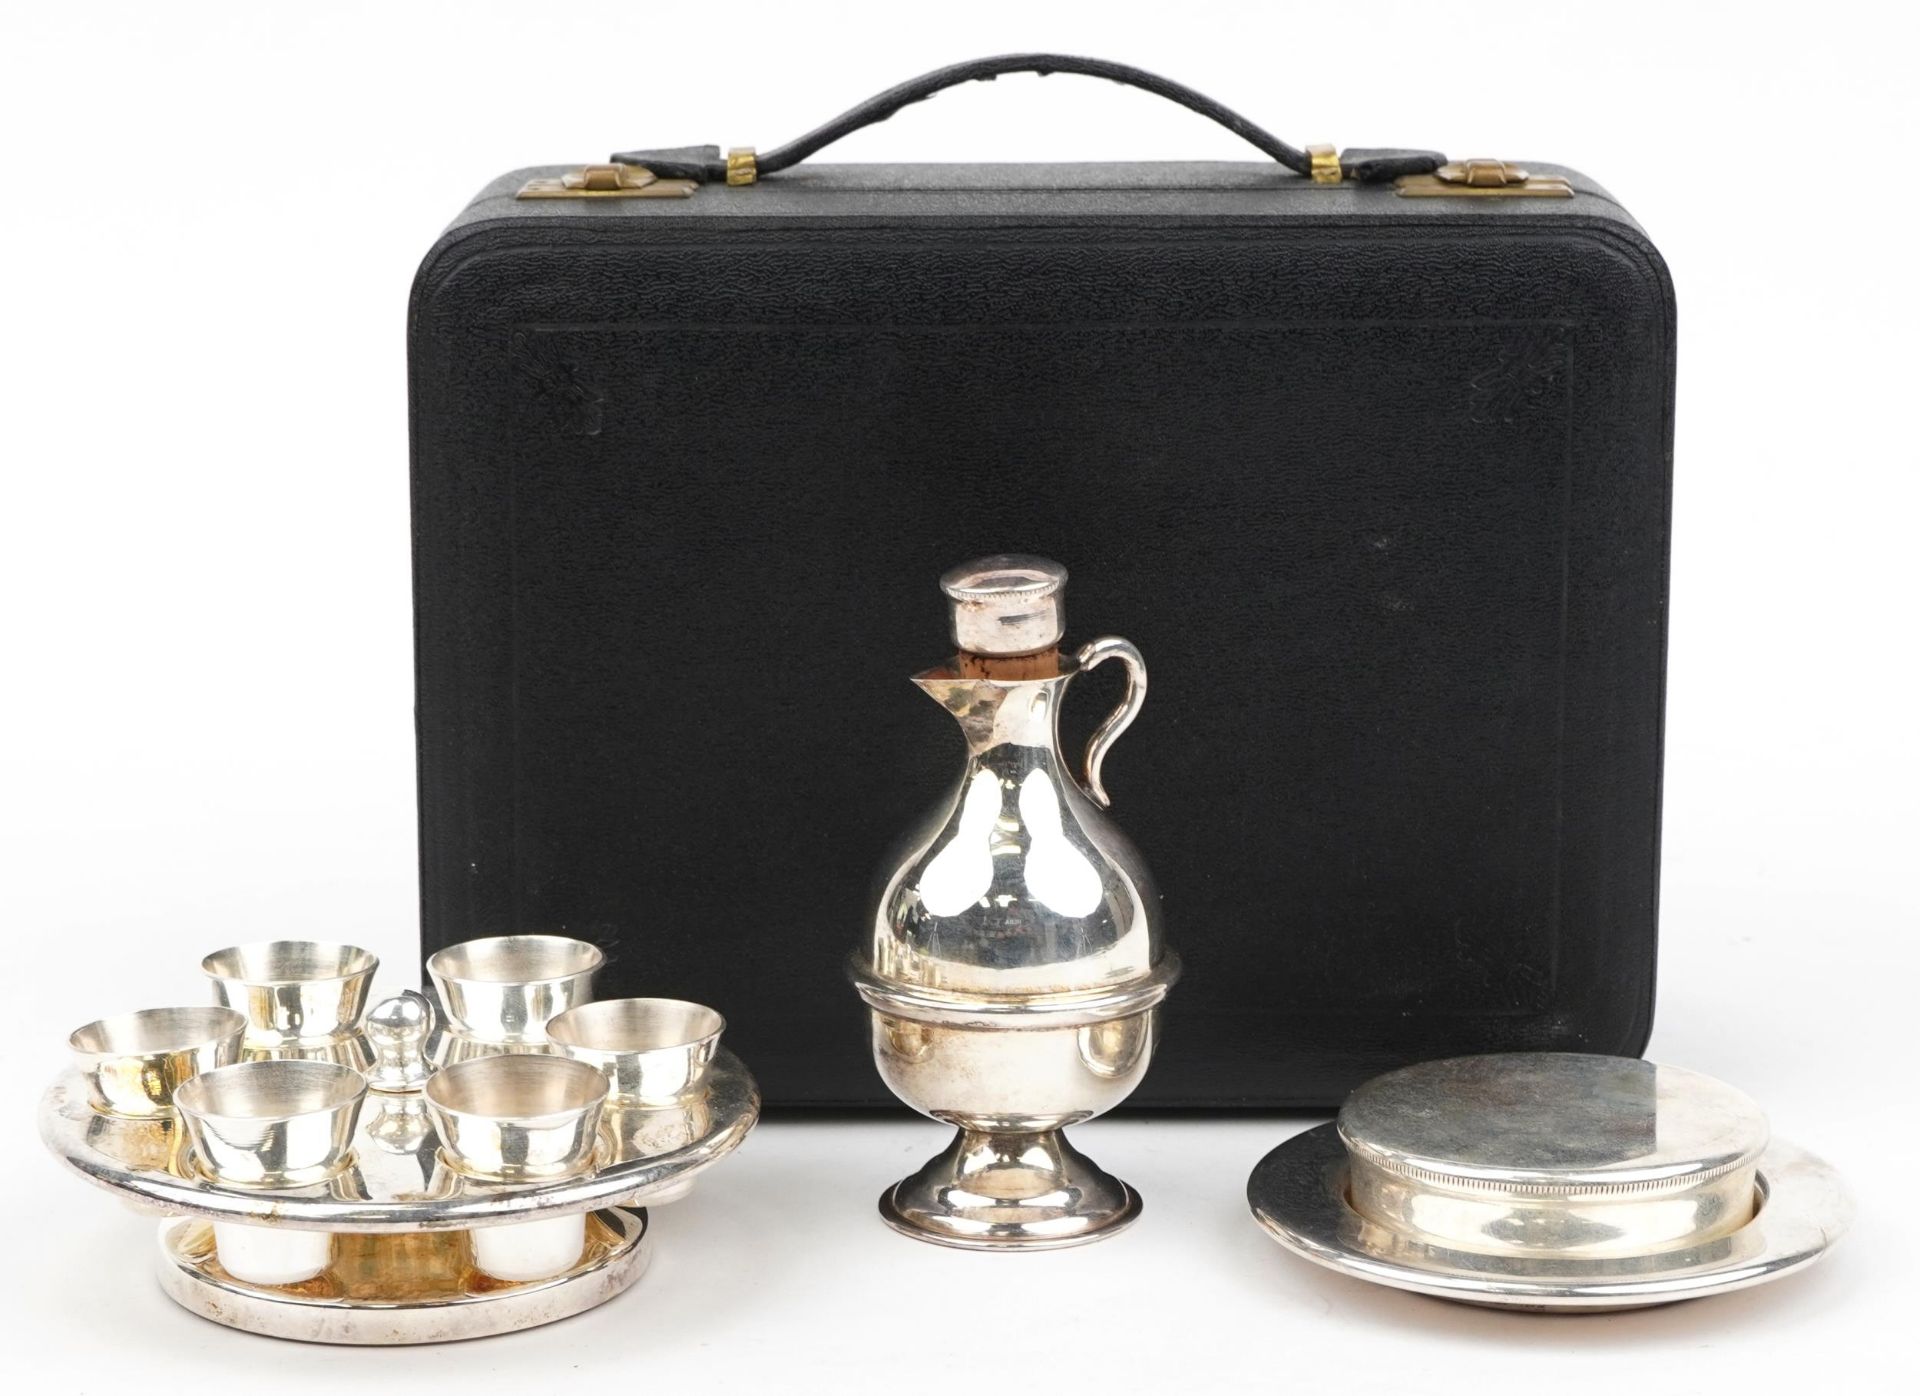 Late 19th/early 20th century silver plated holy communion set housed in a velvet and silk lined